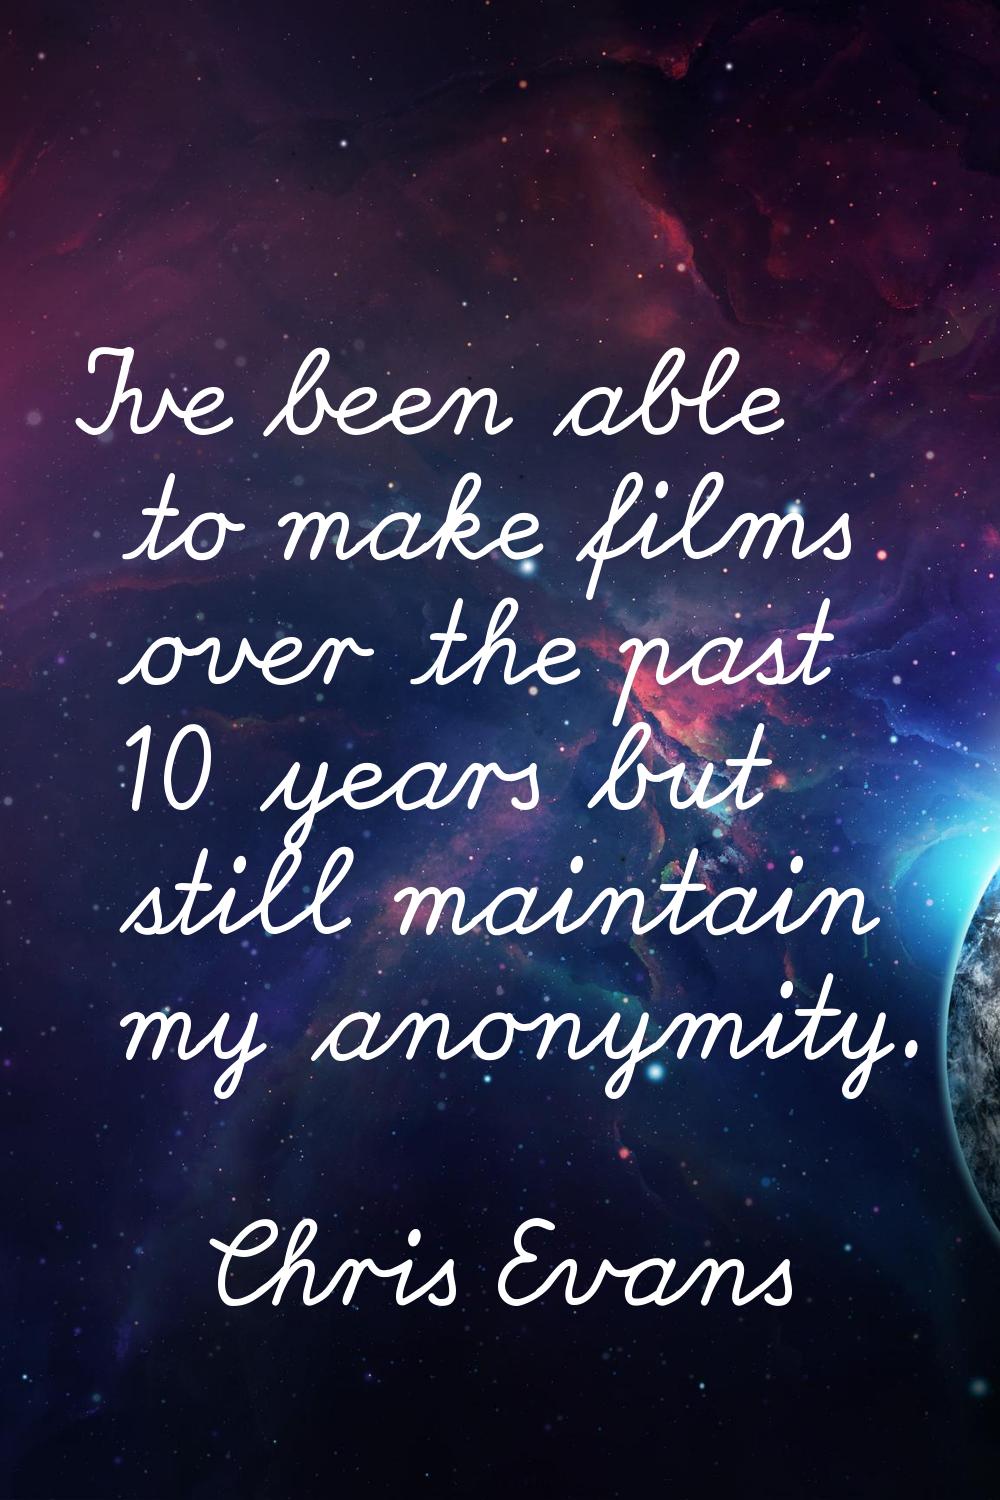 I've been able to make films over the past 10 years but still maintain my anonymity.